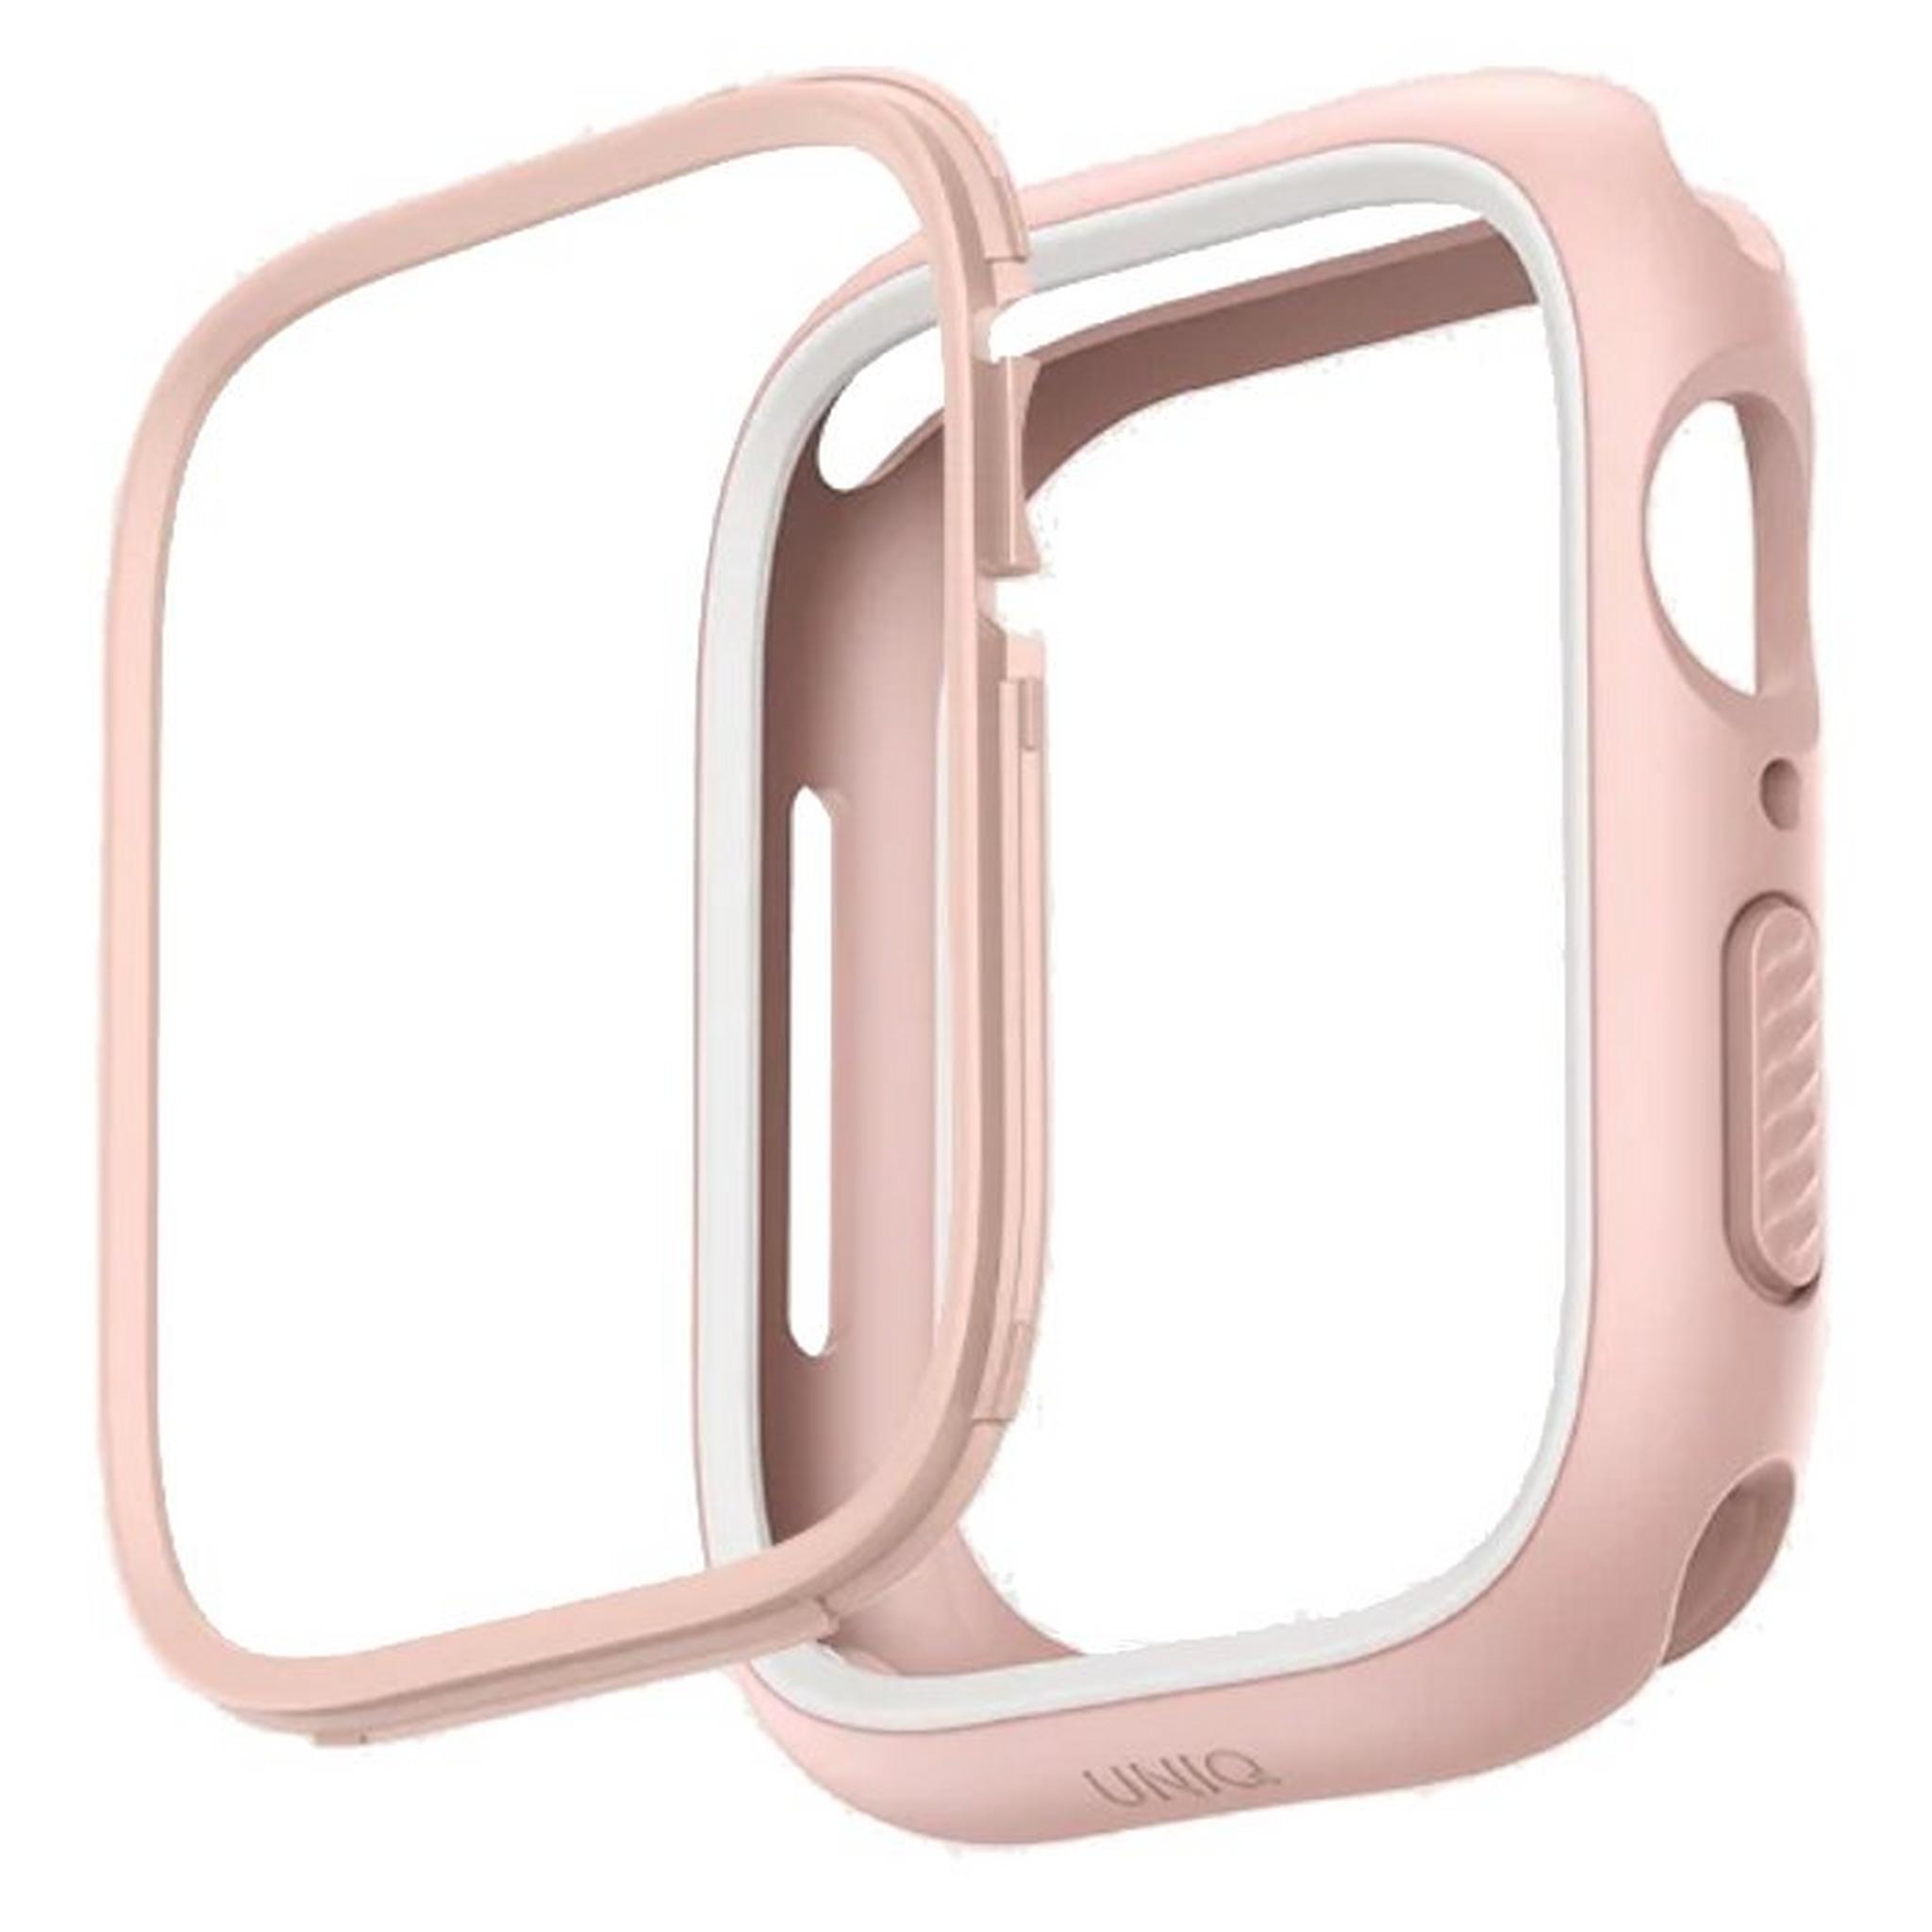 UNIQ Moduo Case with Interchangeable Bezels for Apple Watch 44 /45mm - Pink / White